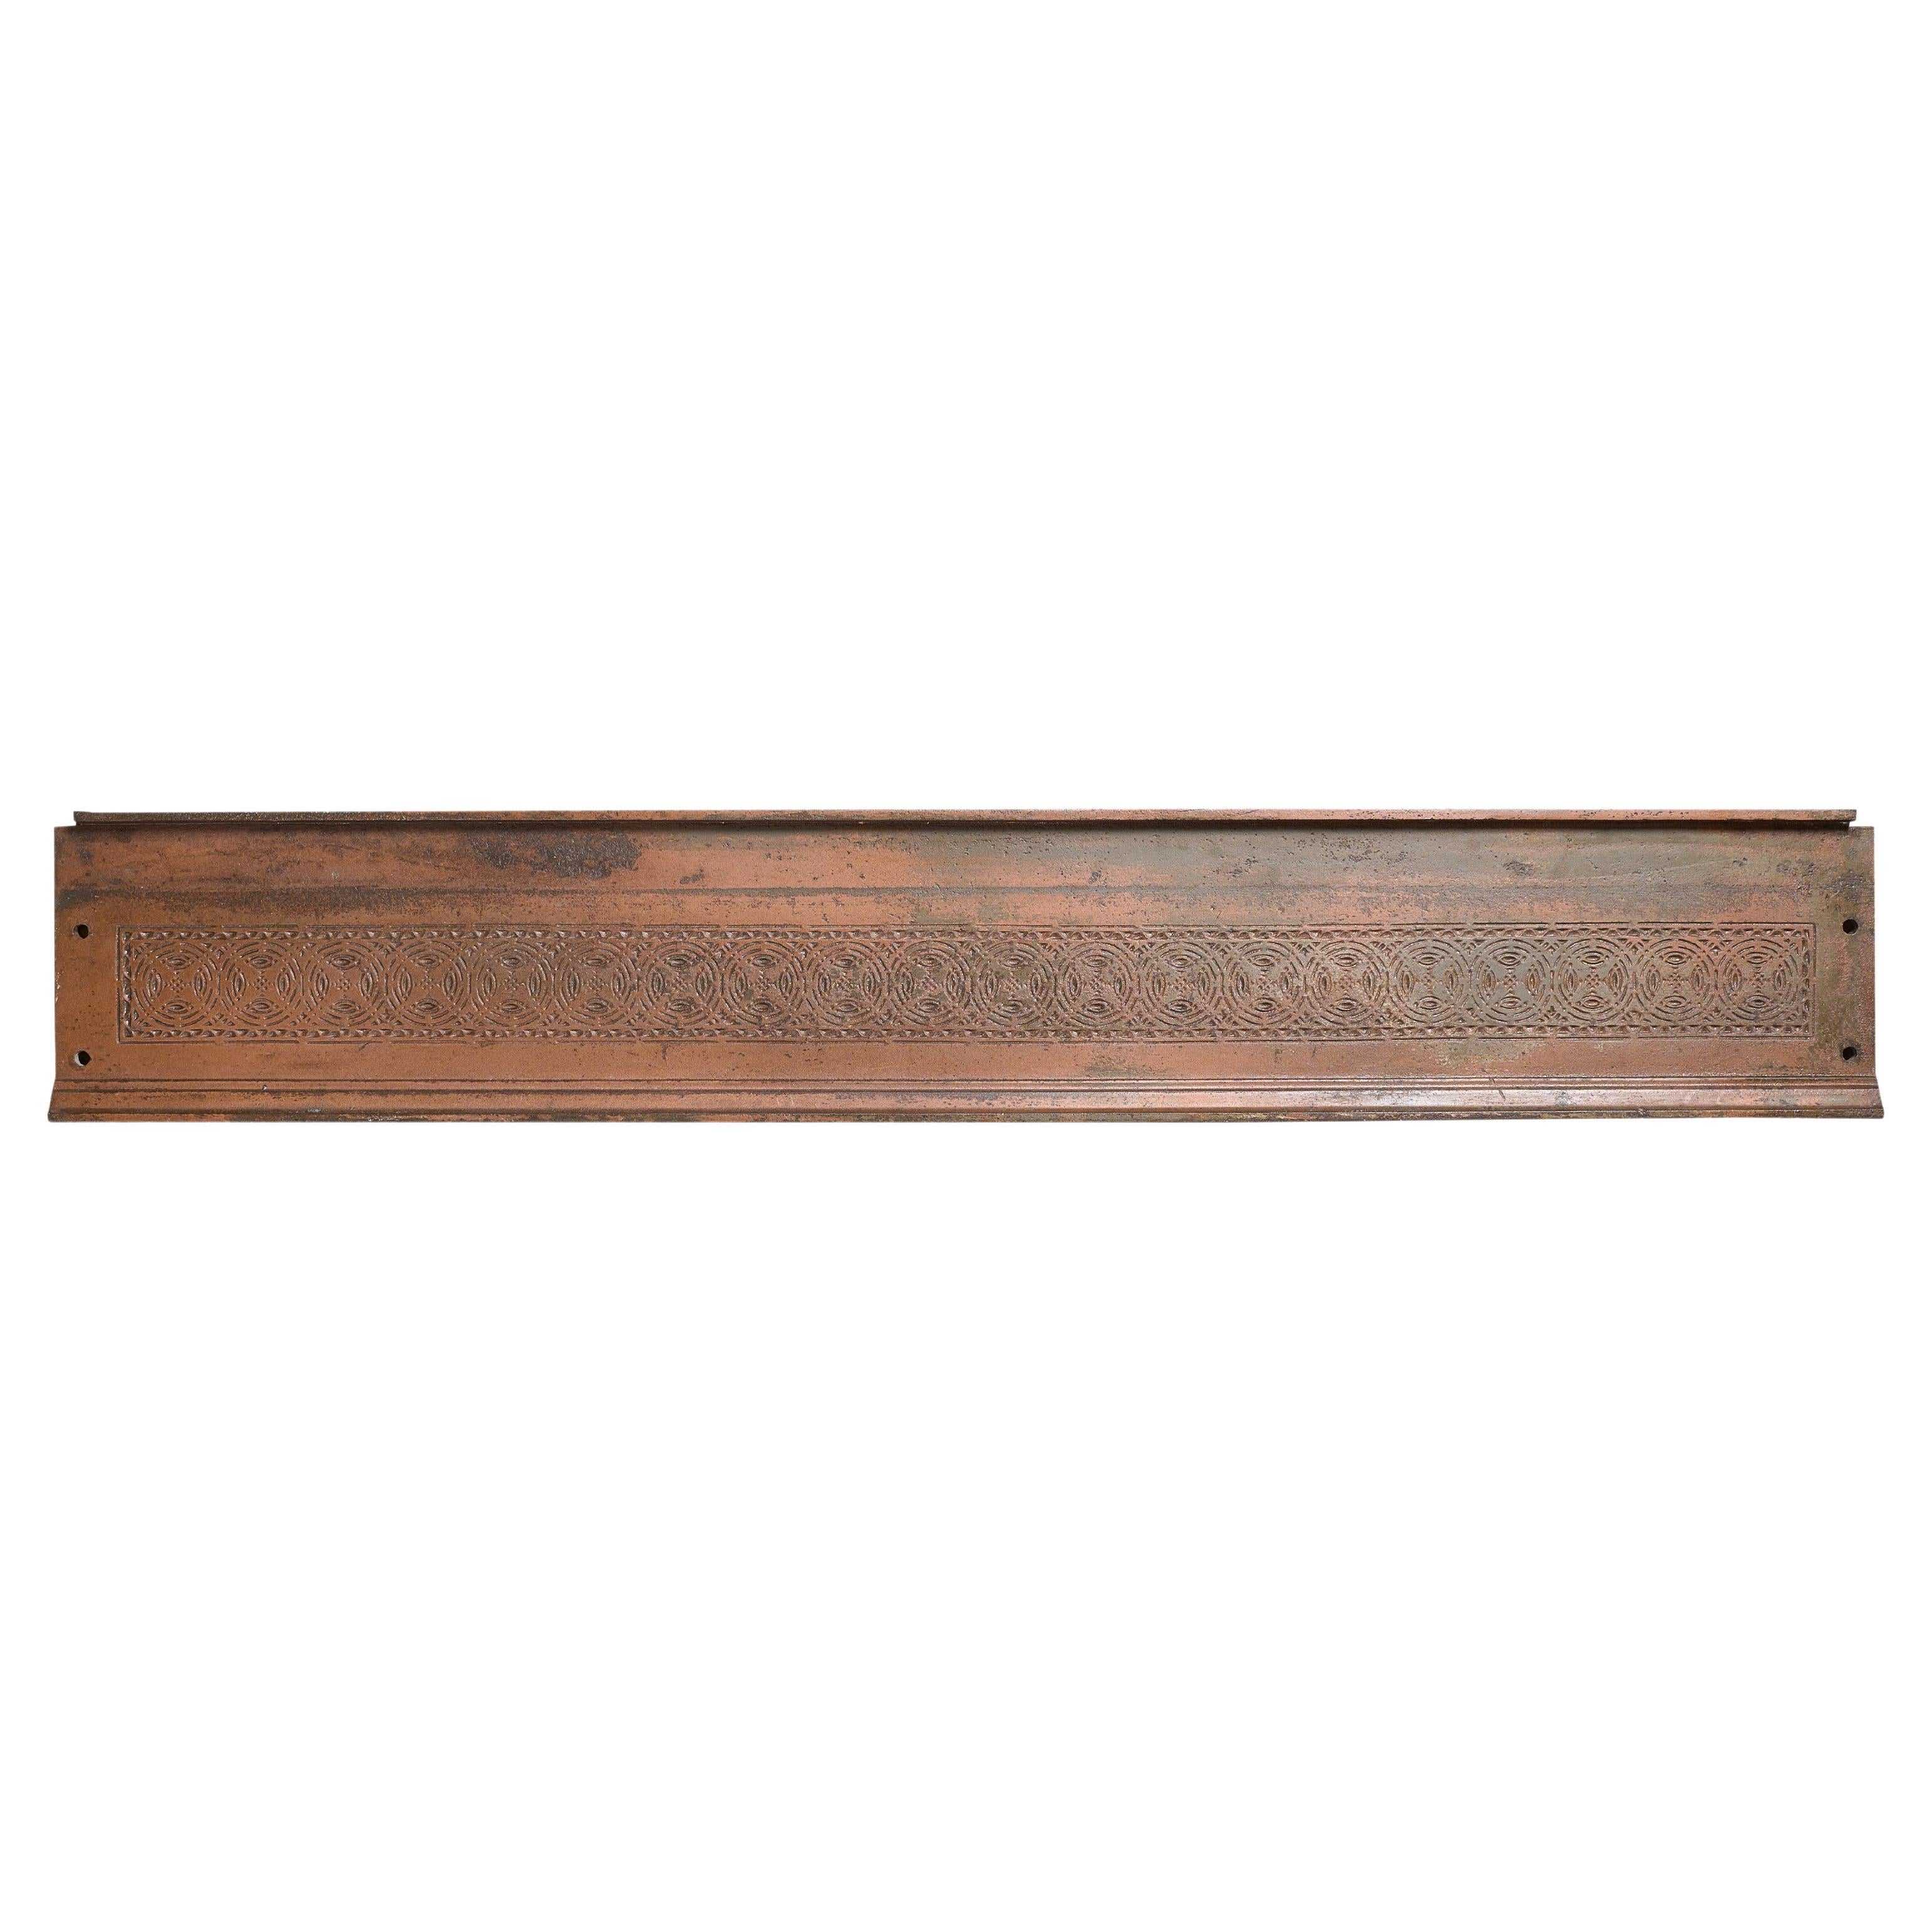 Double Sided Copper over Cast Iron Stair Riser from the Chicago Stock Exchange For Sale